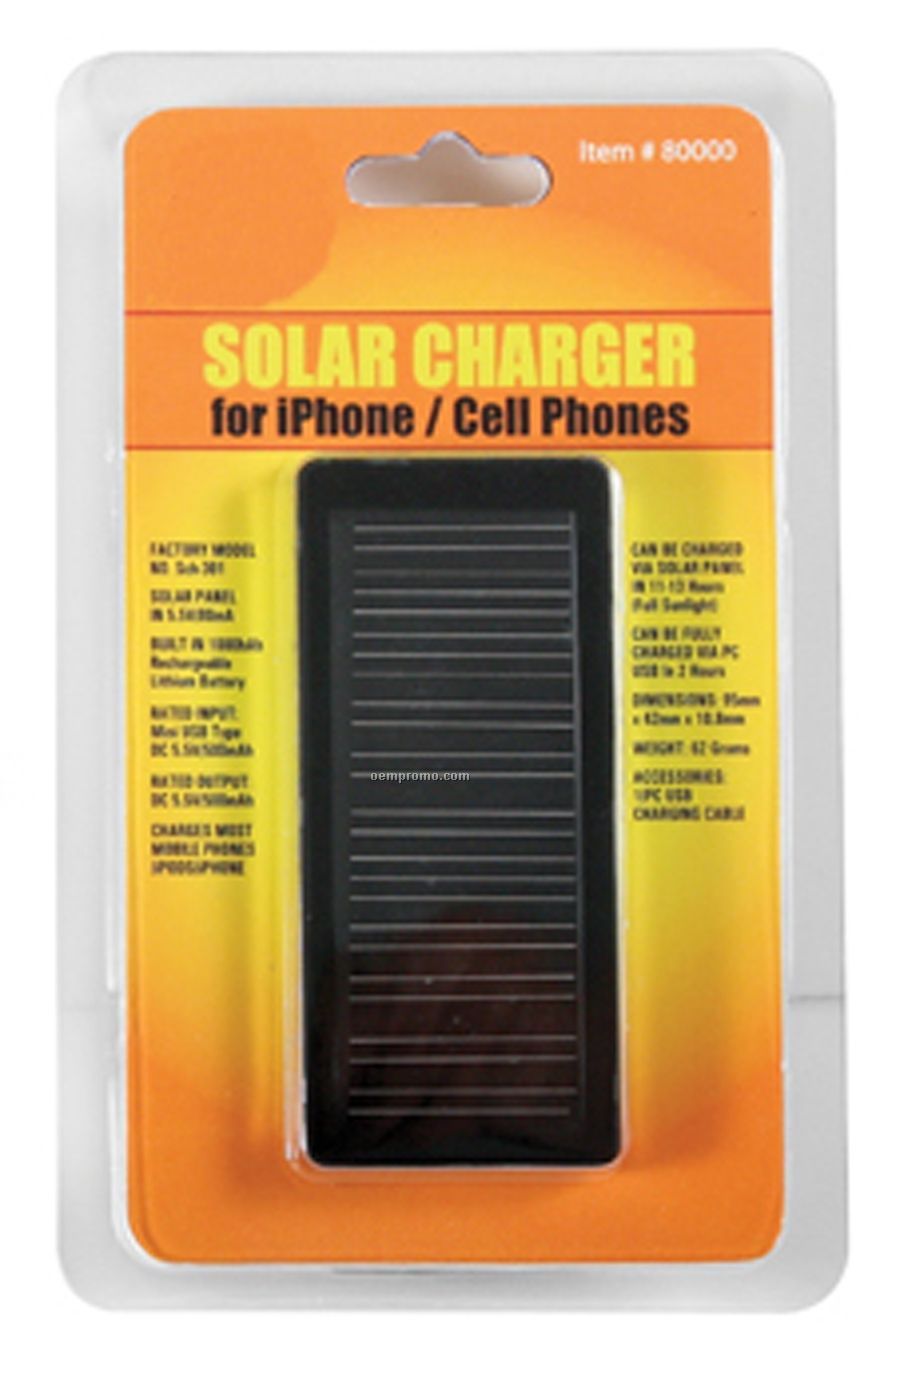 Cell Phone & Iphone Solar Charger